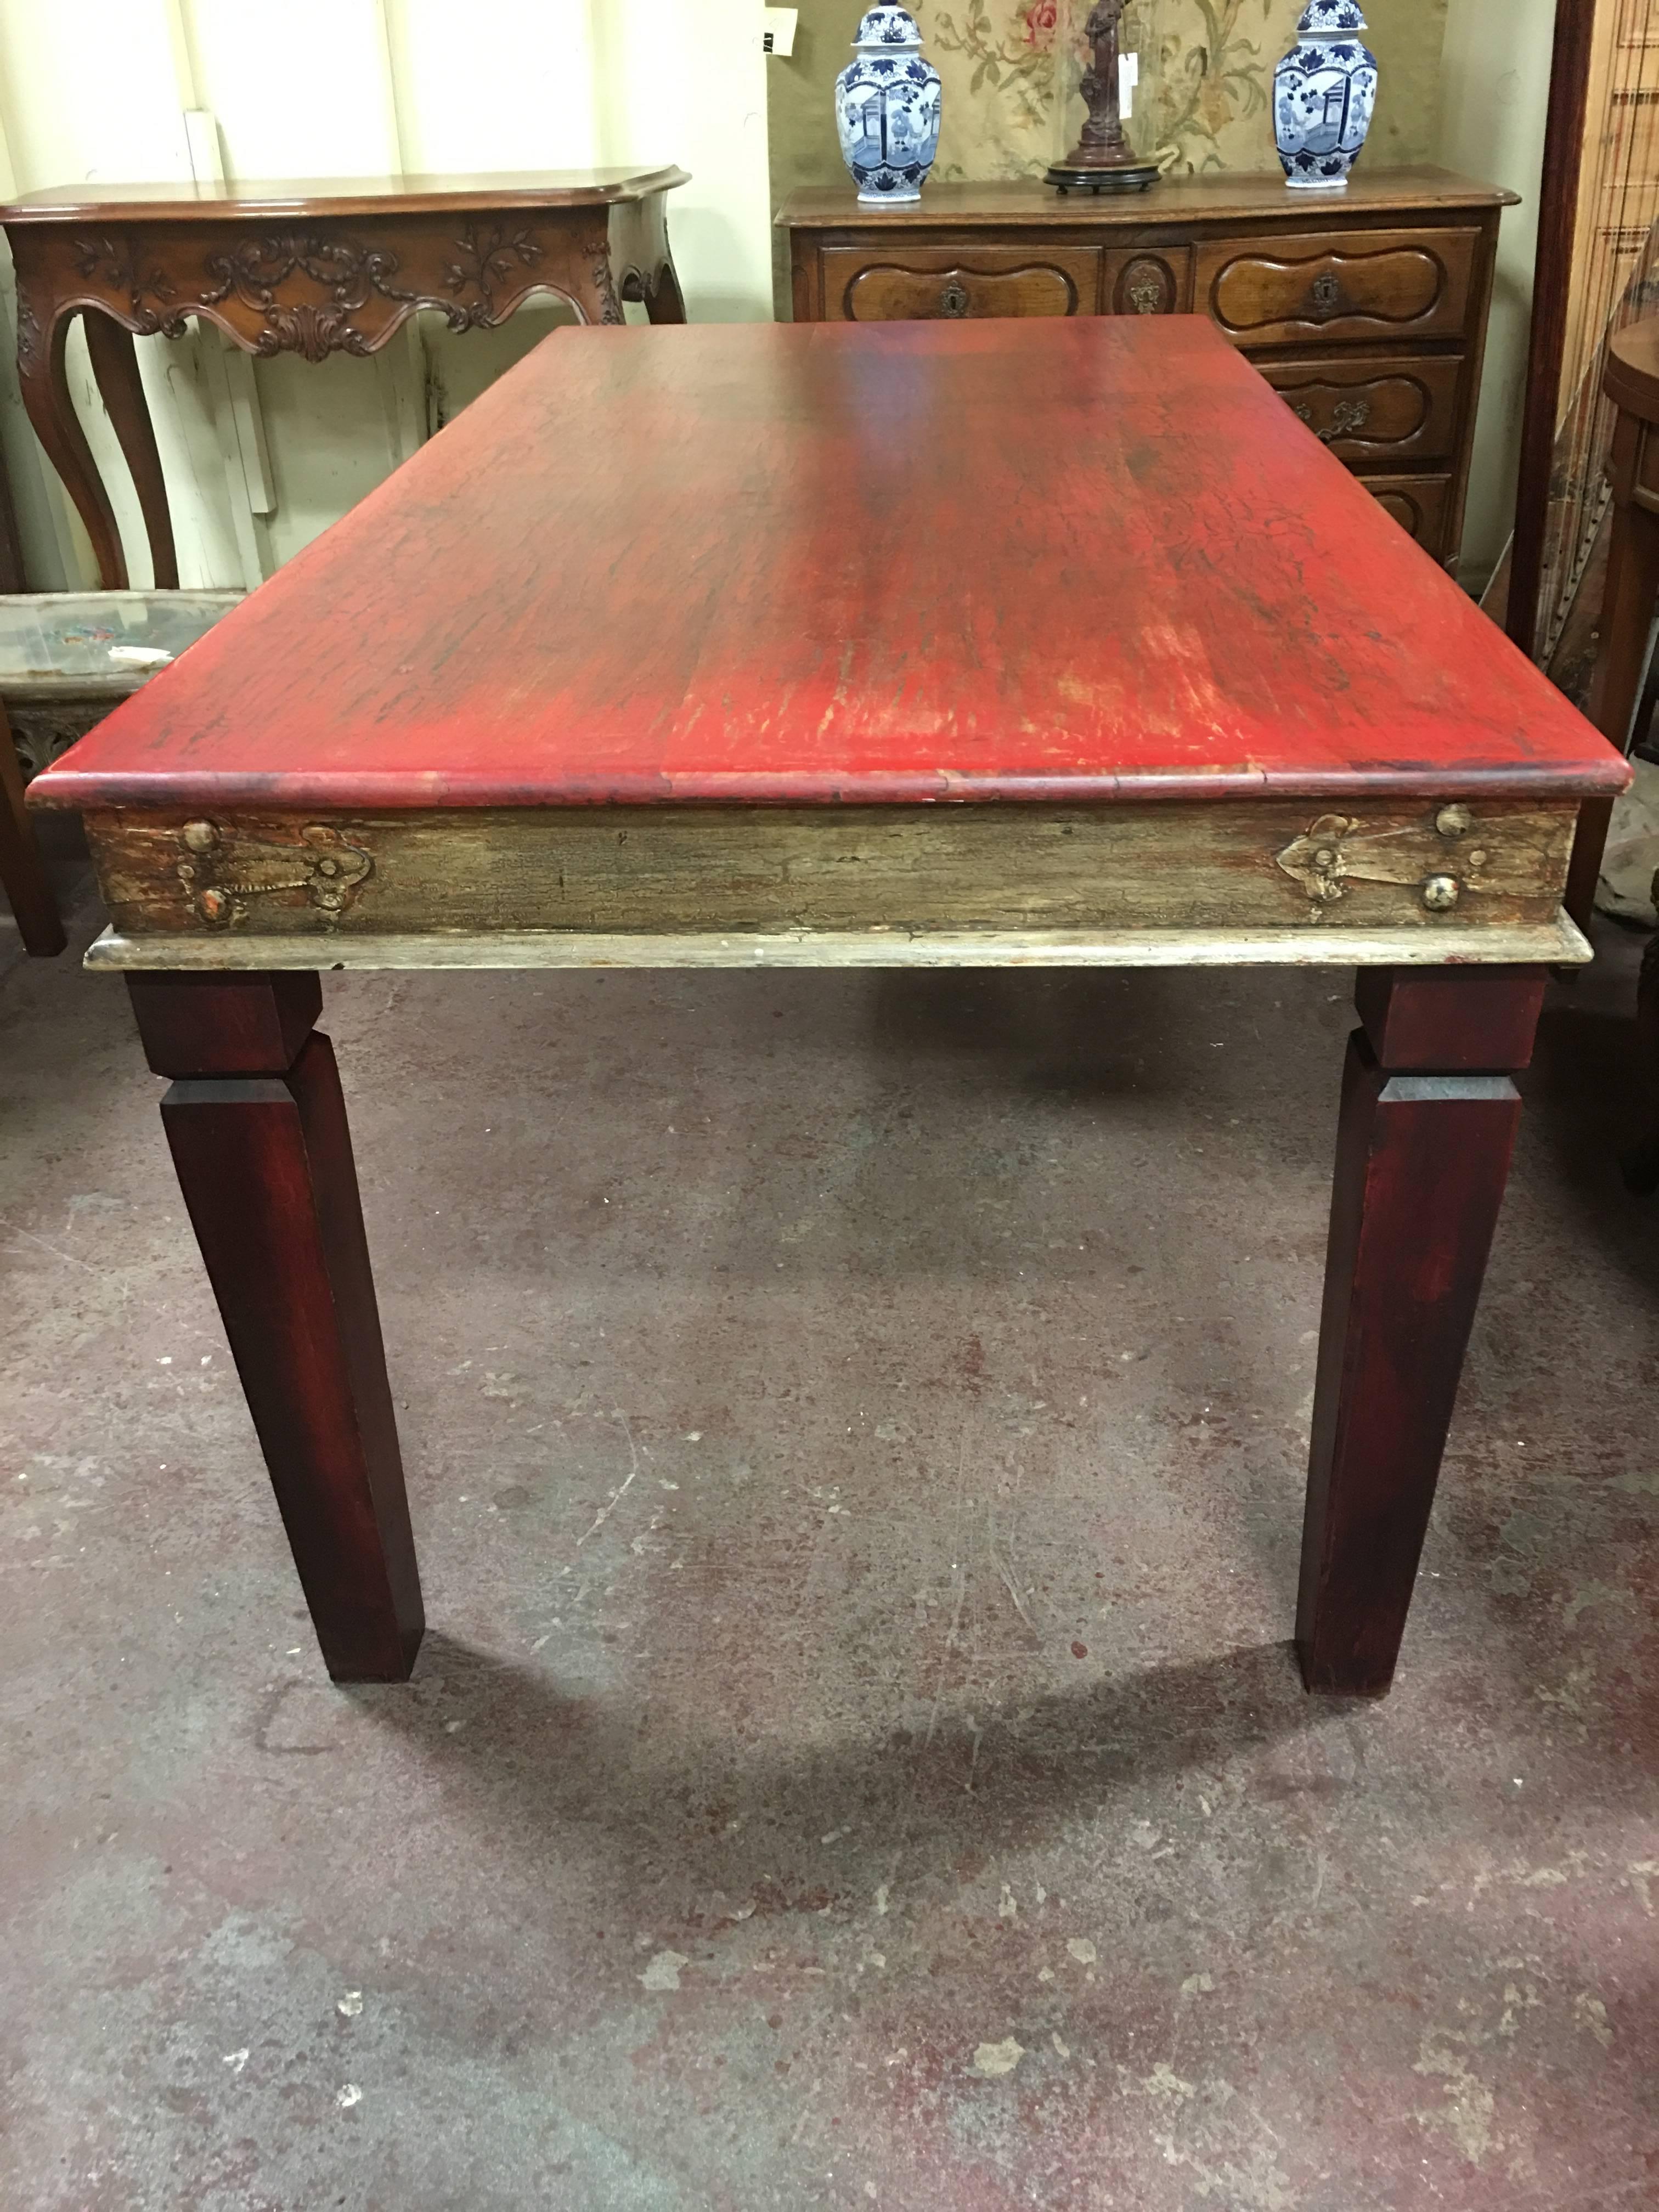 Period Art Deco table dining table center table
Not original finish.
CLOSING BUSINESS all items reduced substantially 